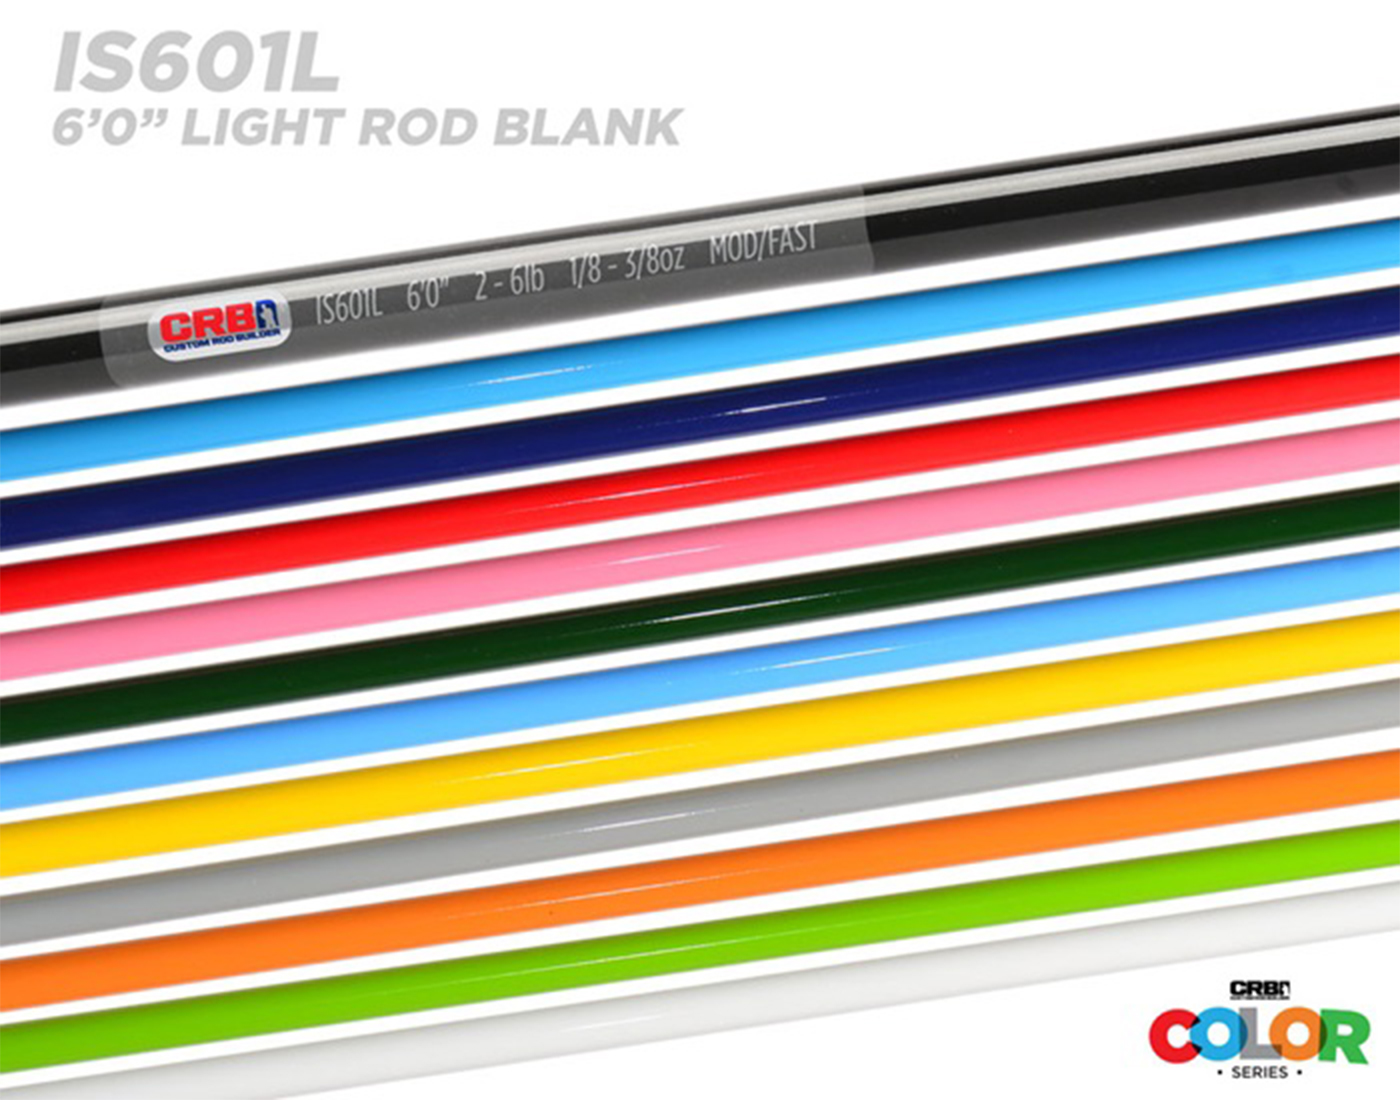 CRB 5'6" Light Color Series Rod Blank IS561L 